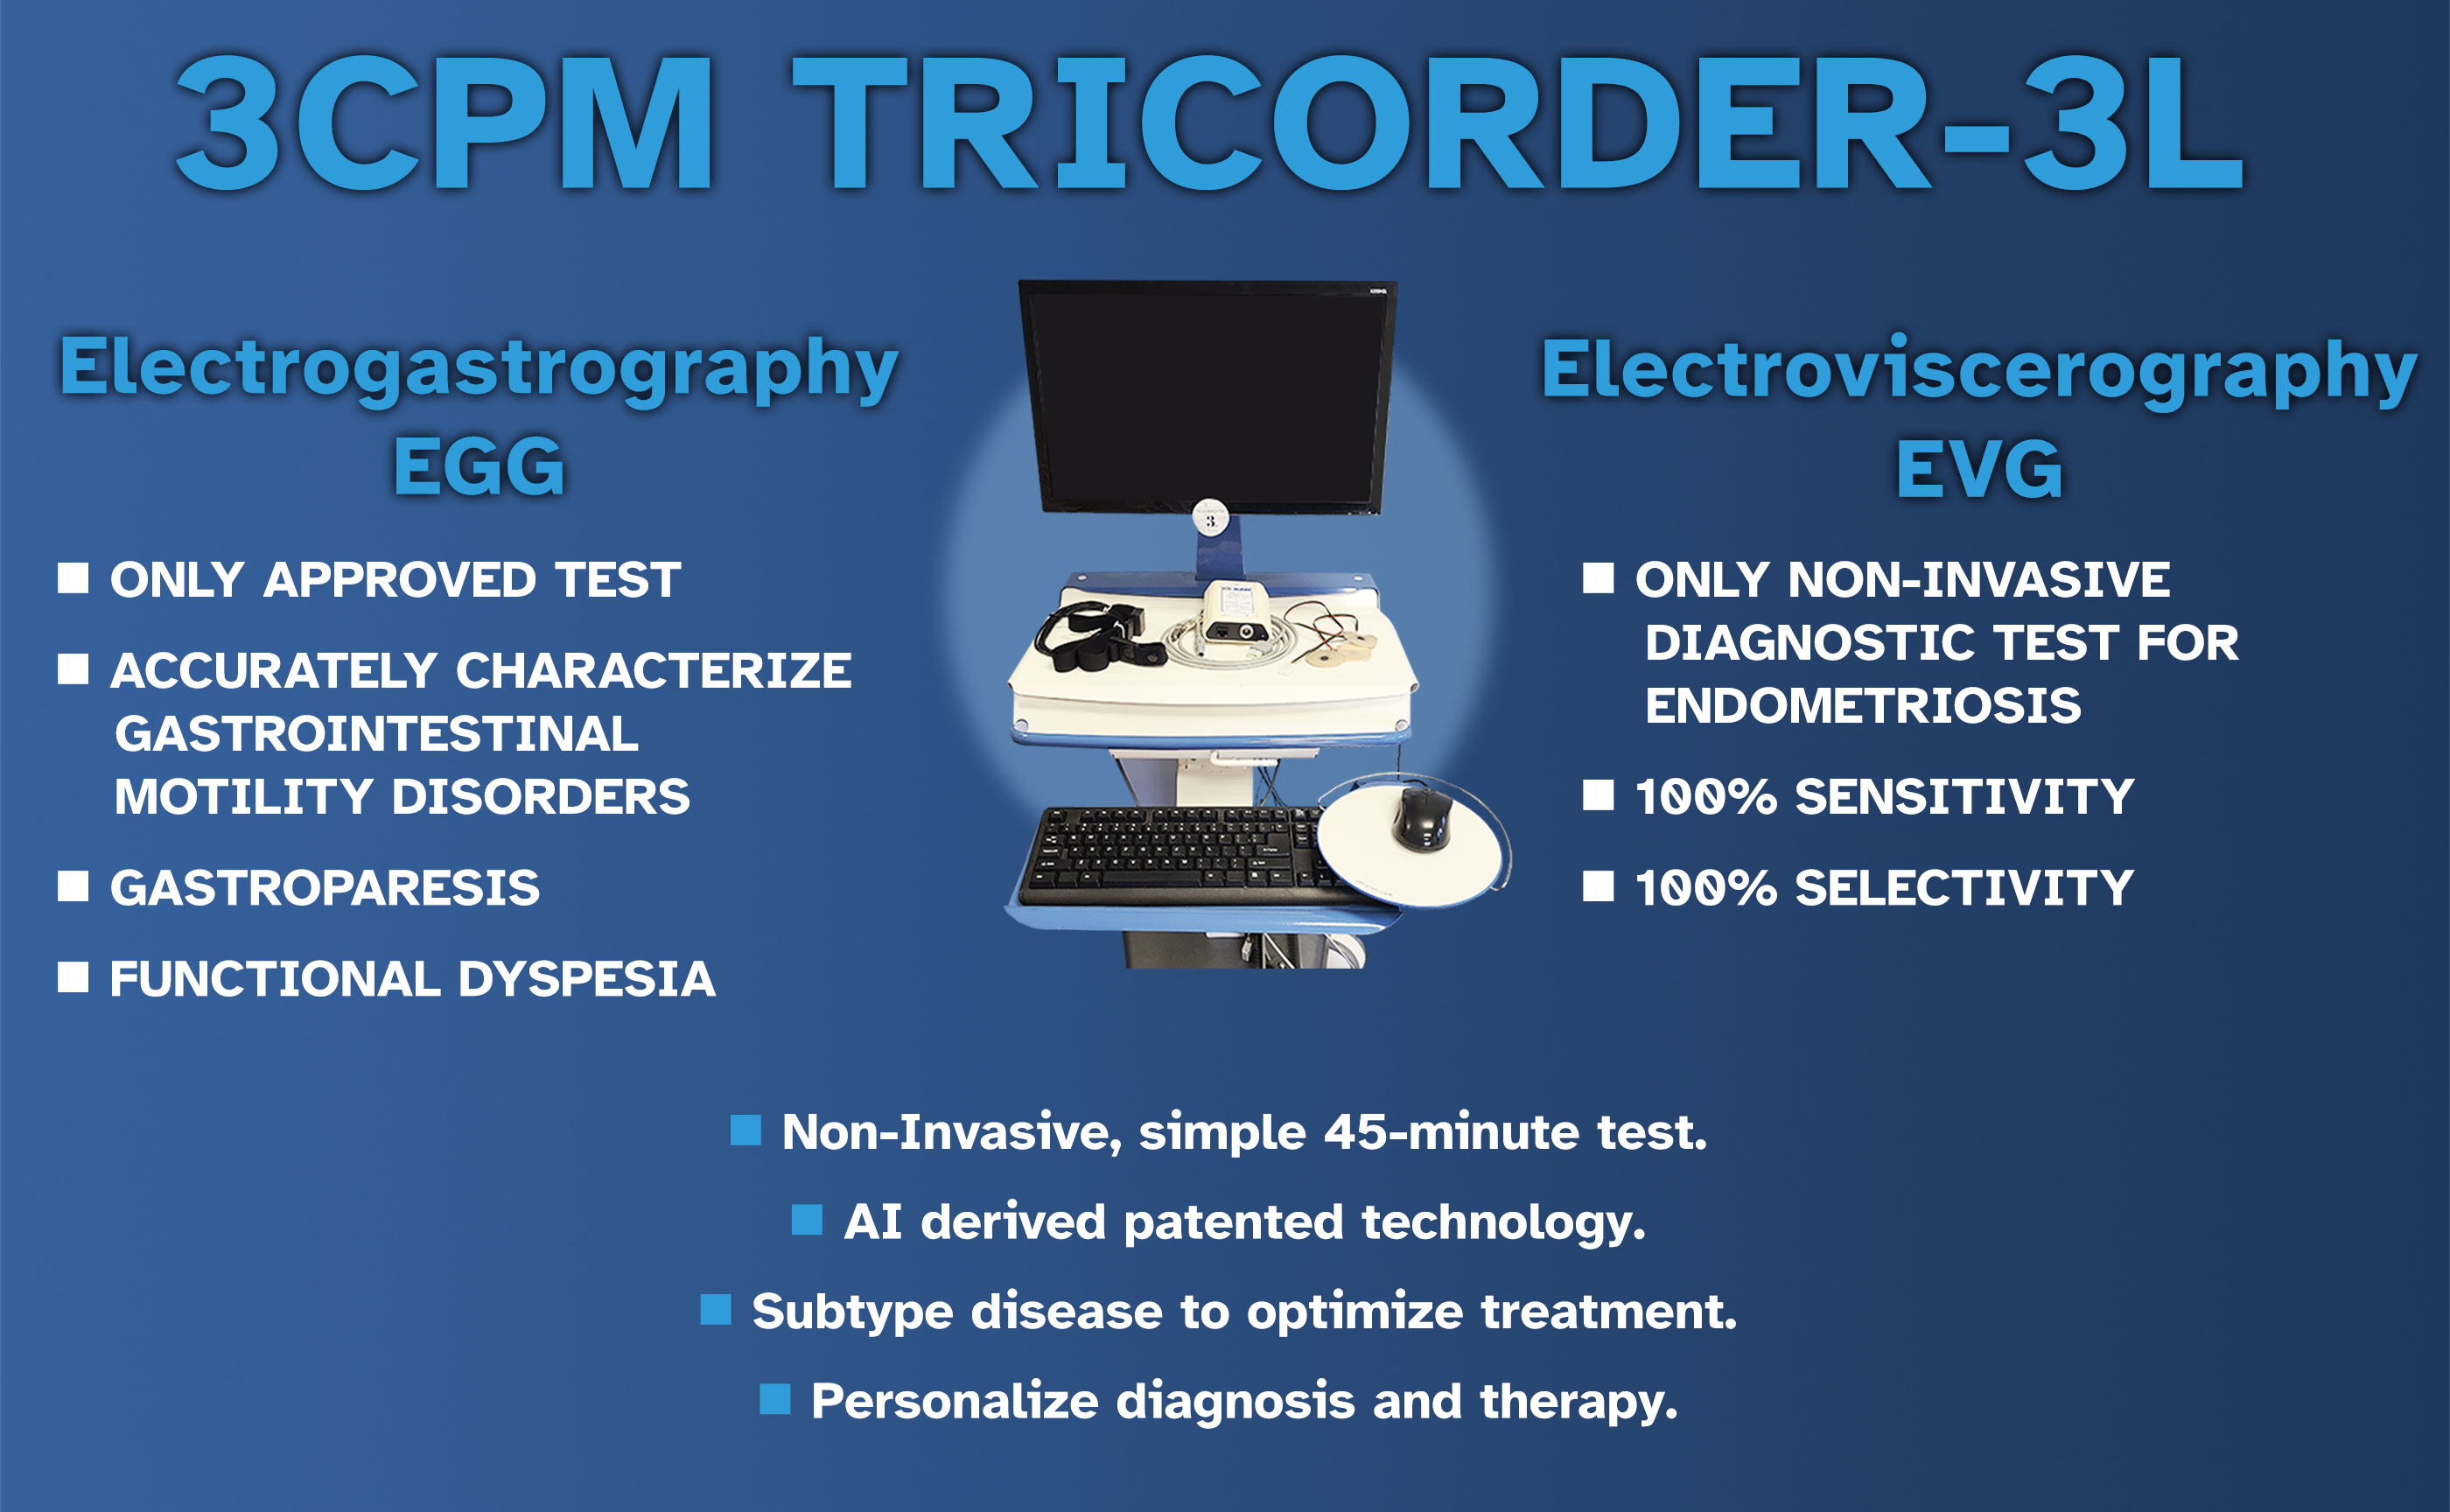 3CPM TRICORDER-3L / Electrogastrography EGG / ONLY APPROVED TEST / ACCURATELY CHARACTERIZE GASTROINTESTINAL MOTILITY DISORDERS / GASTROPARESIS / FUNCTIONAL DYSPESIA || Electroviscerography EVG / ONLY NON-INVASIVE DIAGNOSTIC TEST FOR ENDOMETRIOSIS / 100% SENSITIVITY / 100% SELECTIVITY || Non-Invasive, simple 45-minute test.  / AI derived patented technology. / Subtype disease to optimize treatment. / Personalize diagnosis and therapy.